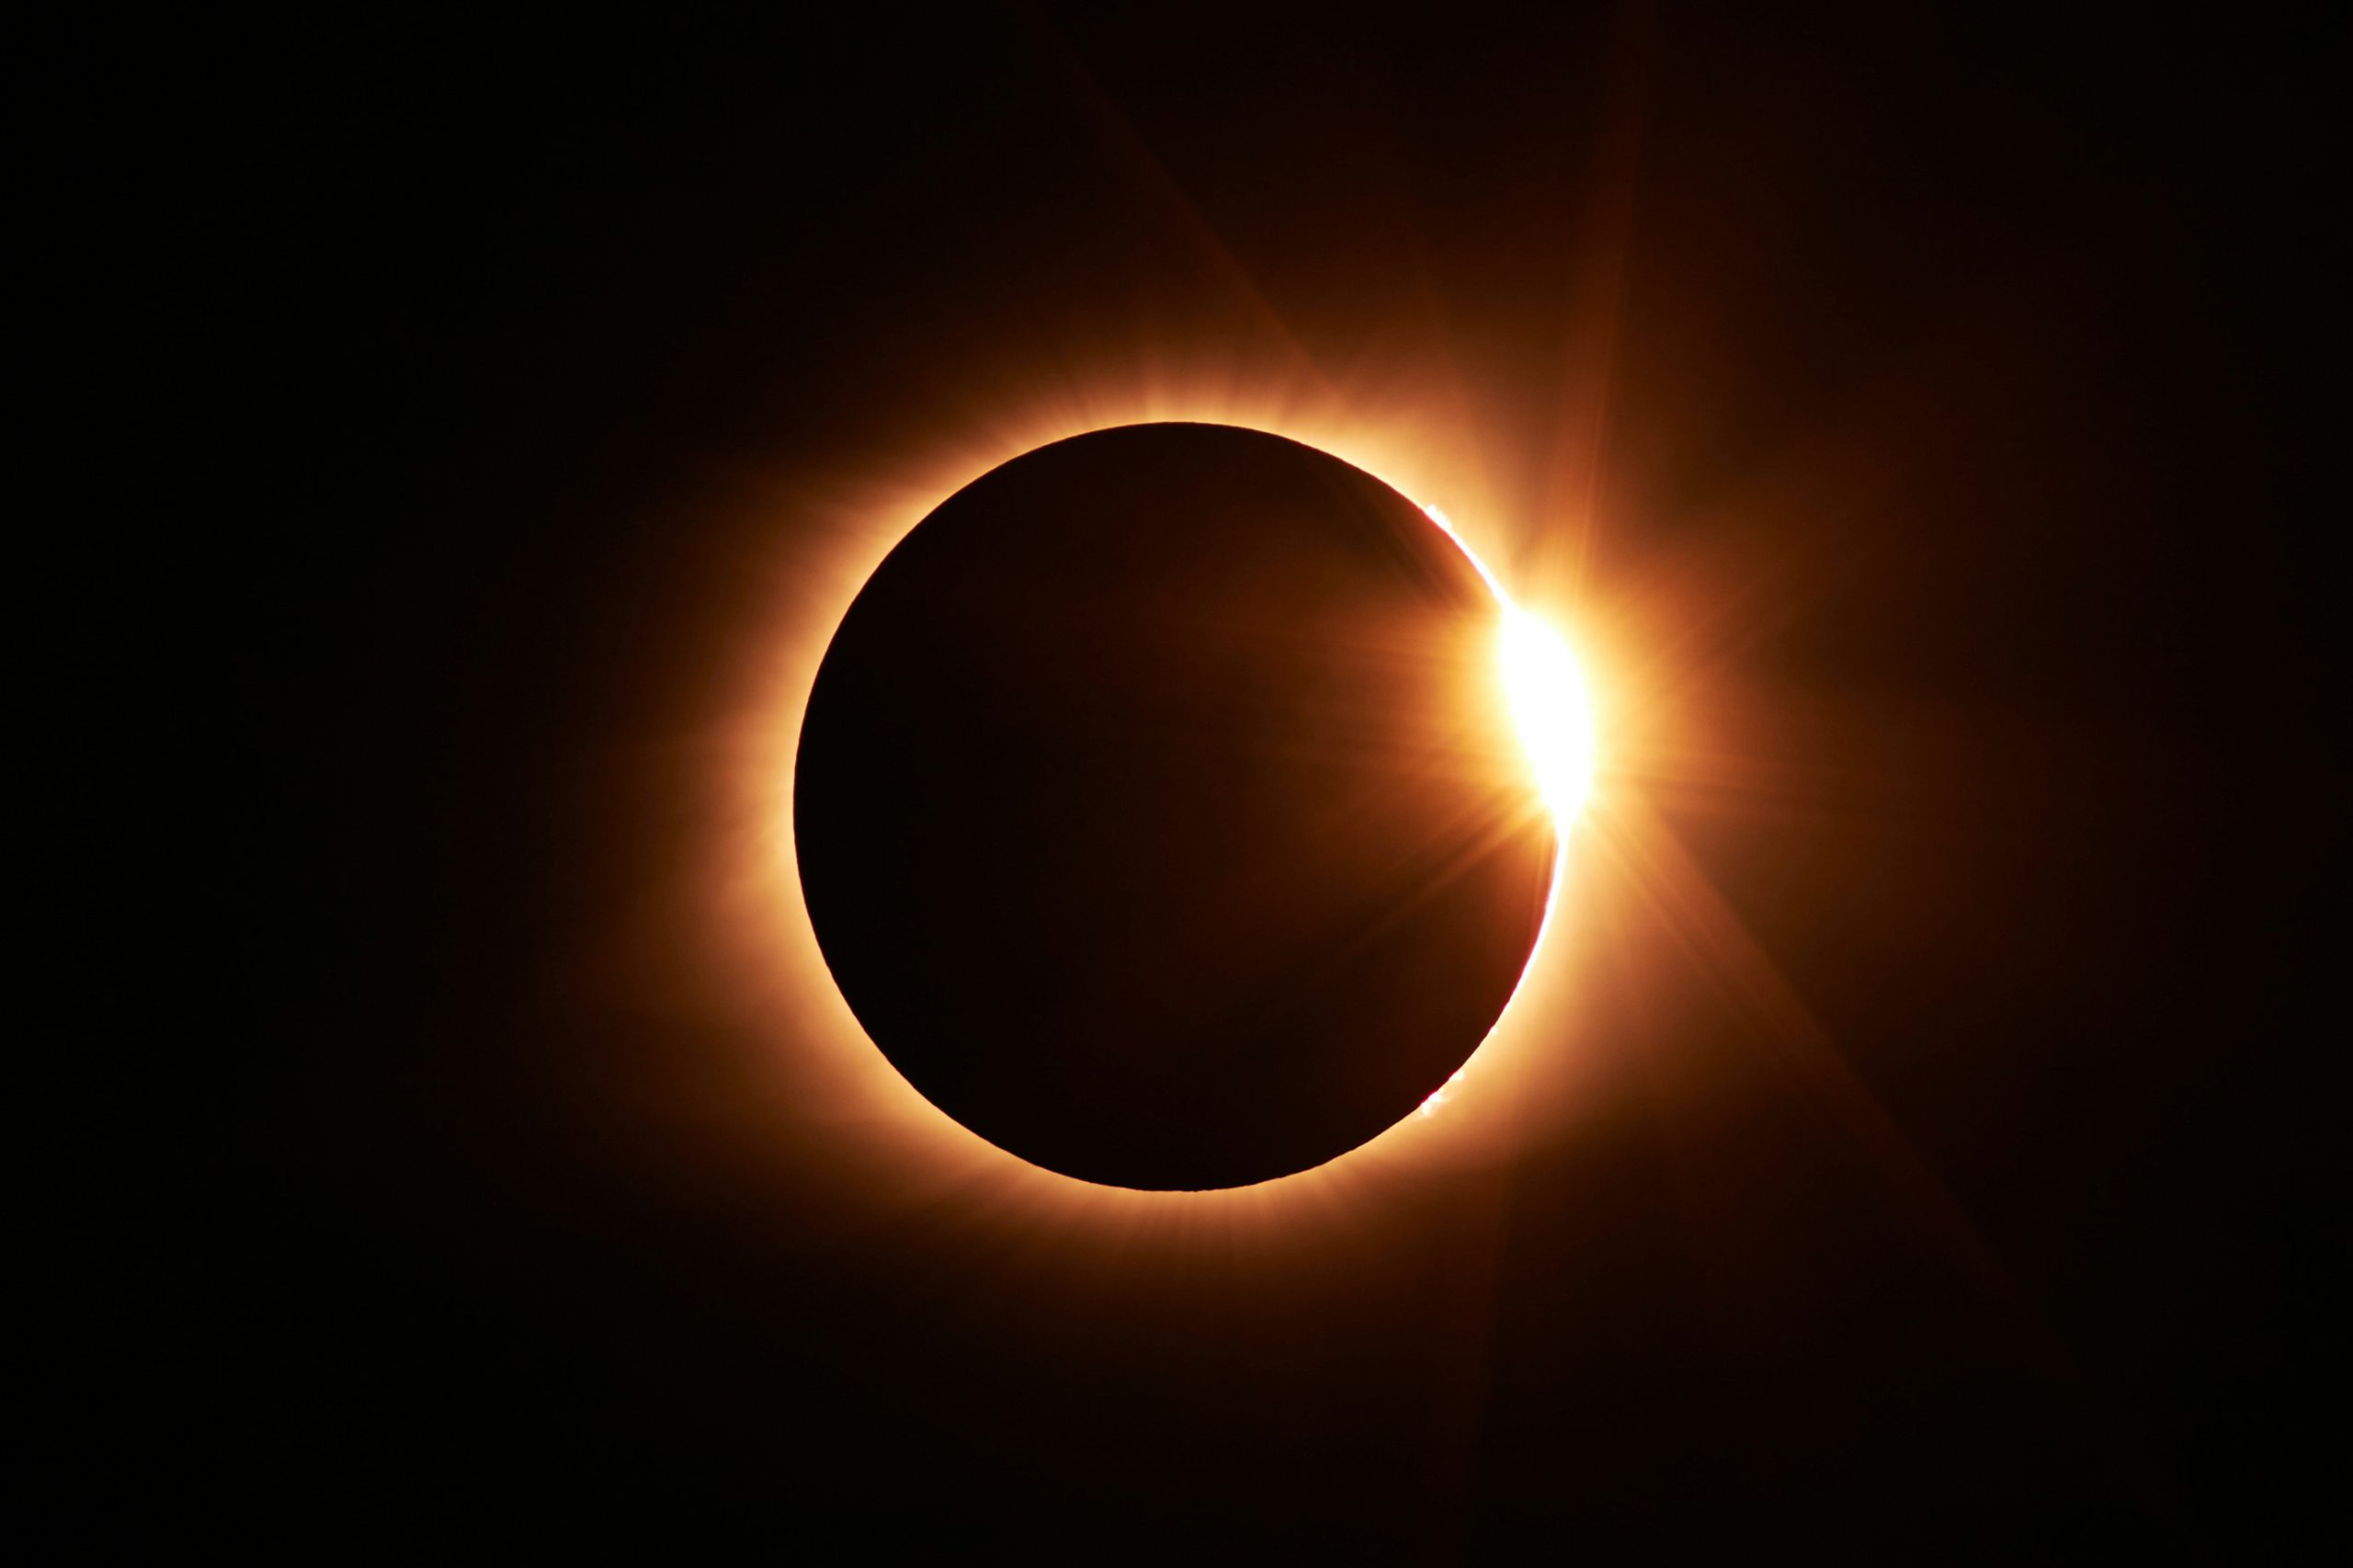 solar eclipse of february 26, 1979